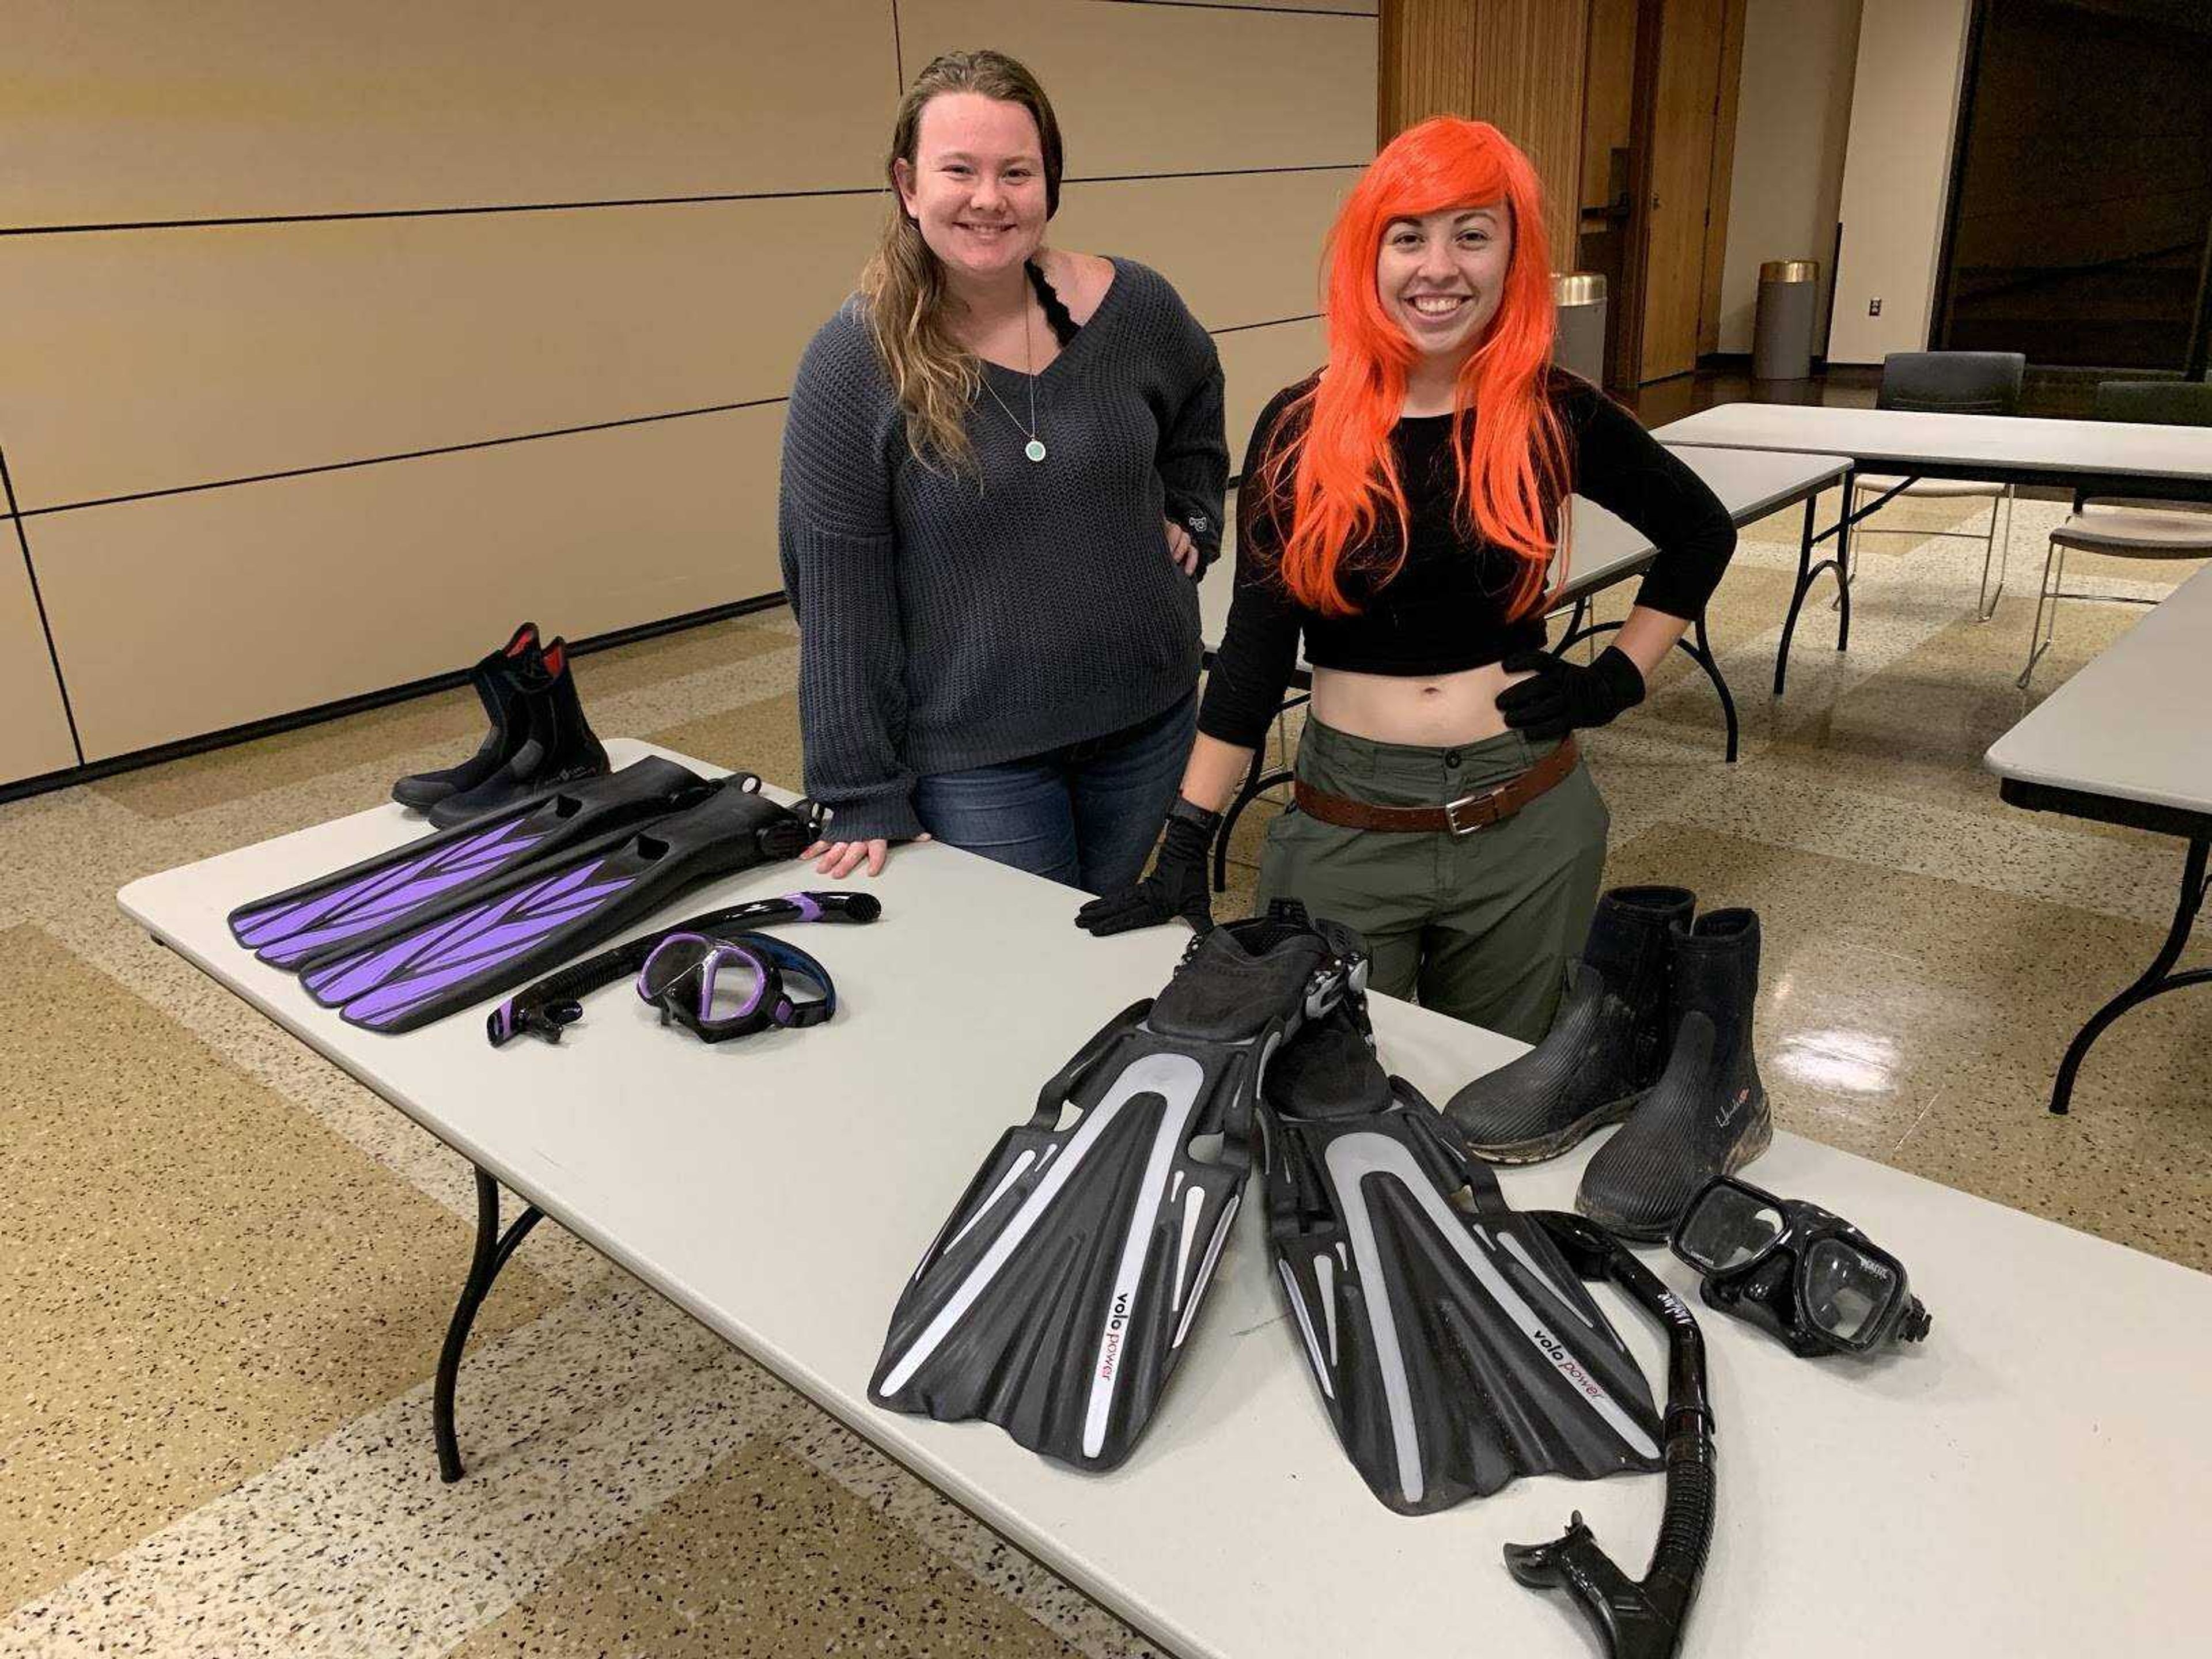 President, Amanda Milbrandt (left) and Vice President, Tori Wright stand behind their scuba gear in their usual meeting room.